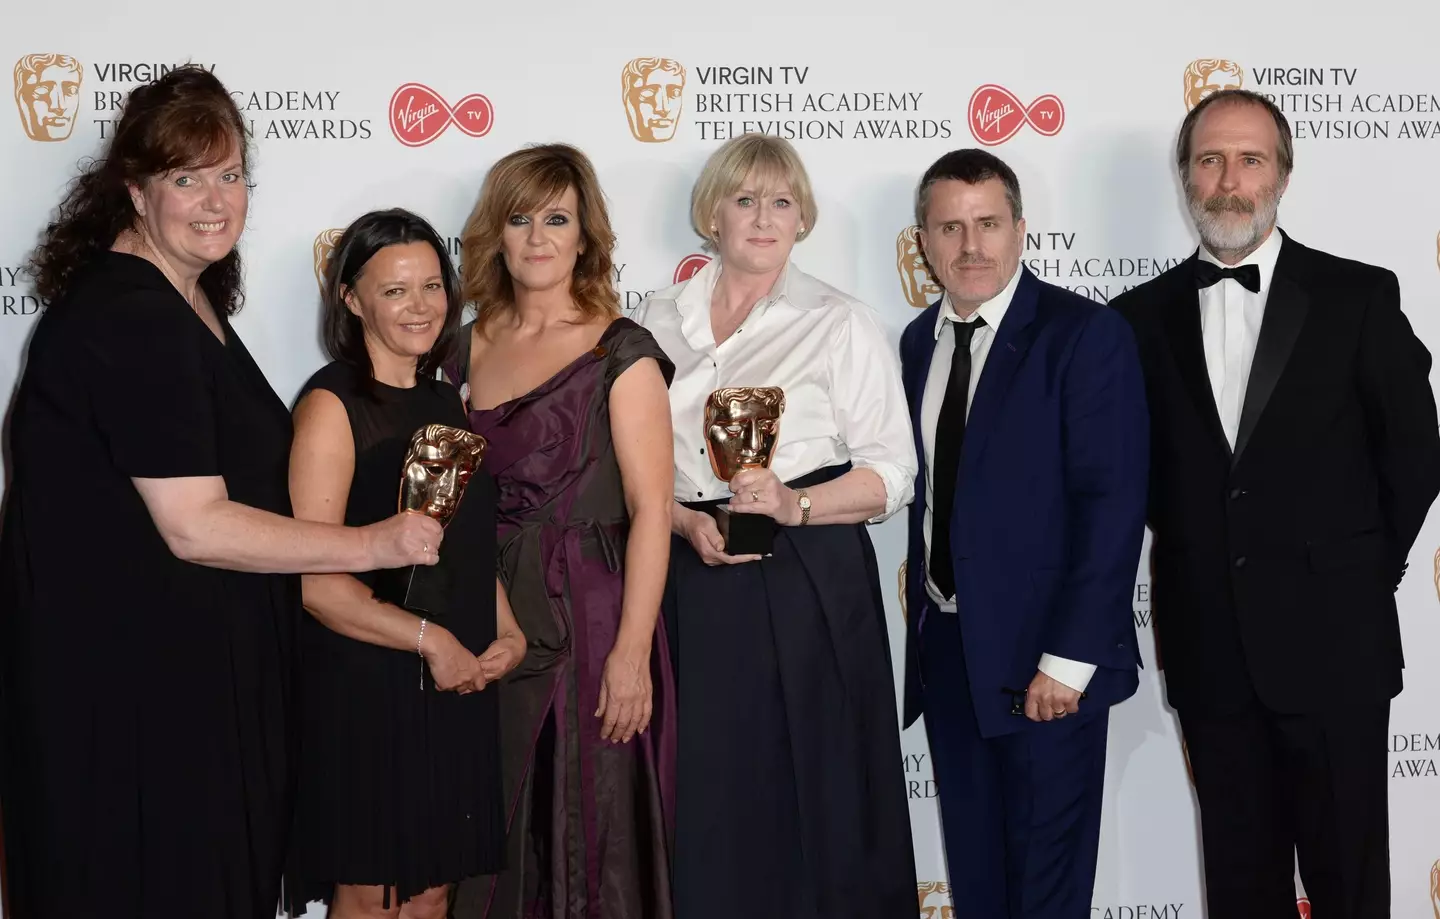 You can bet the third and final season of Happy Valley will be up for some BAFTAs.